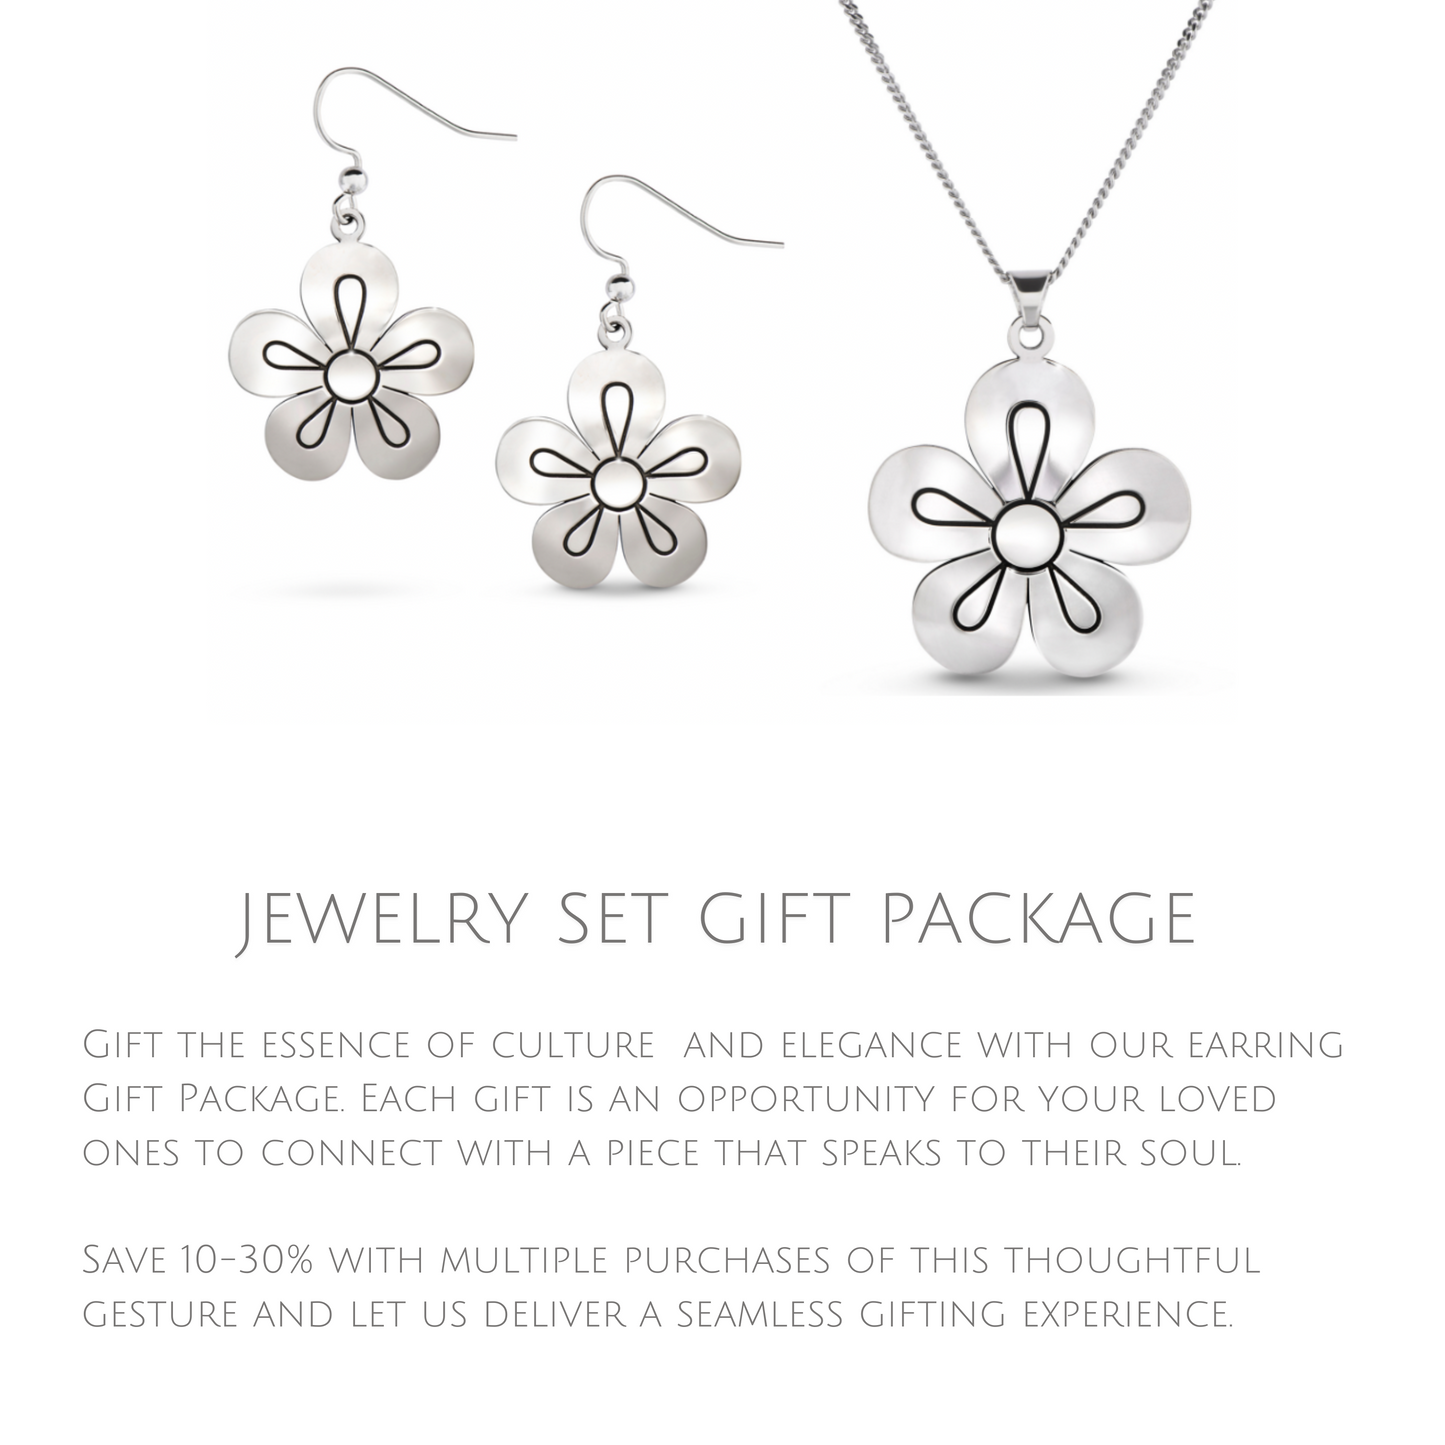 Our Jewelry Set Gift Package